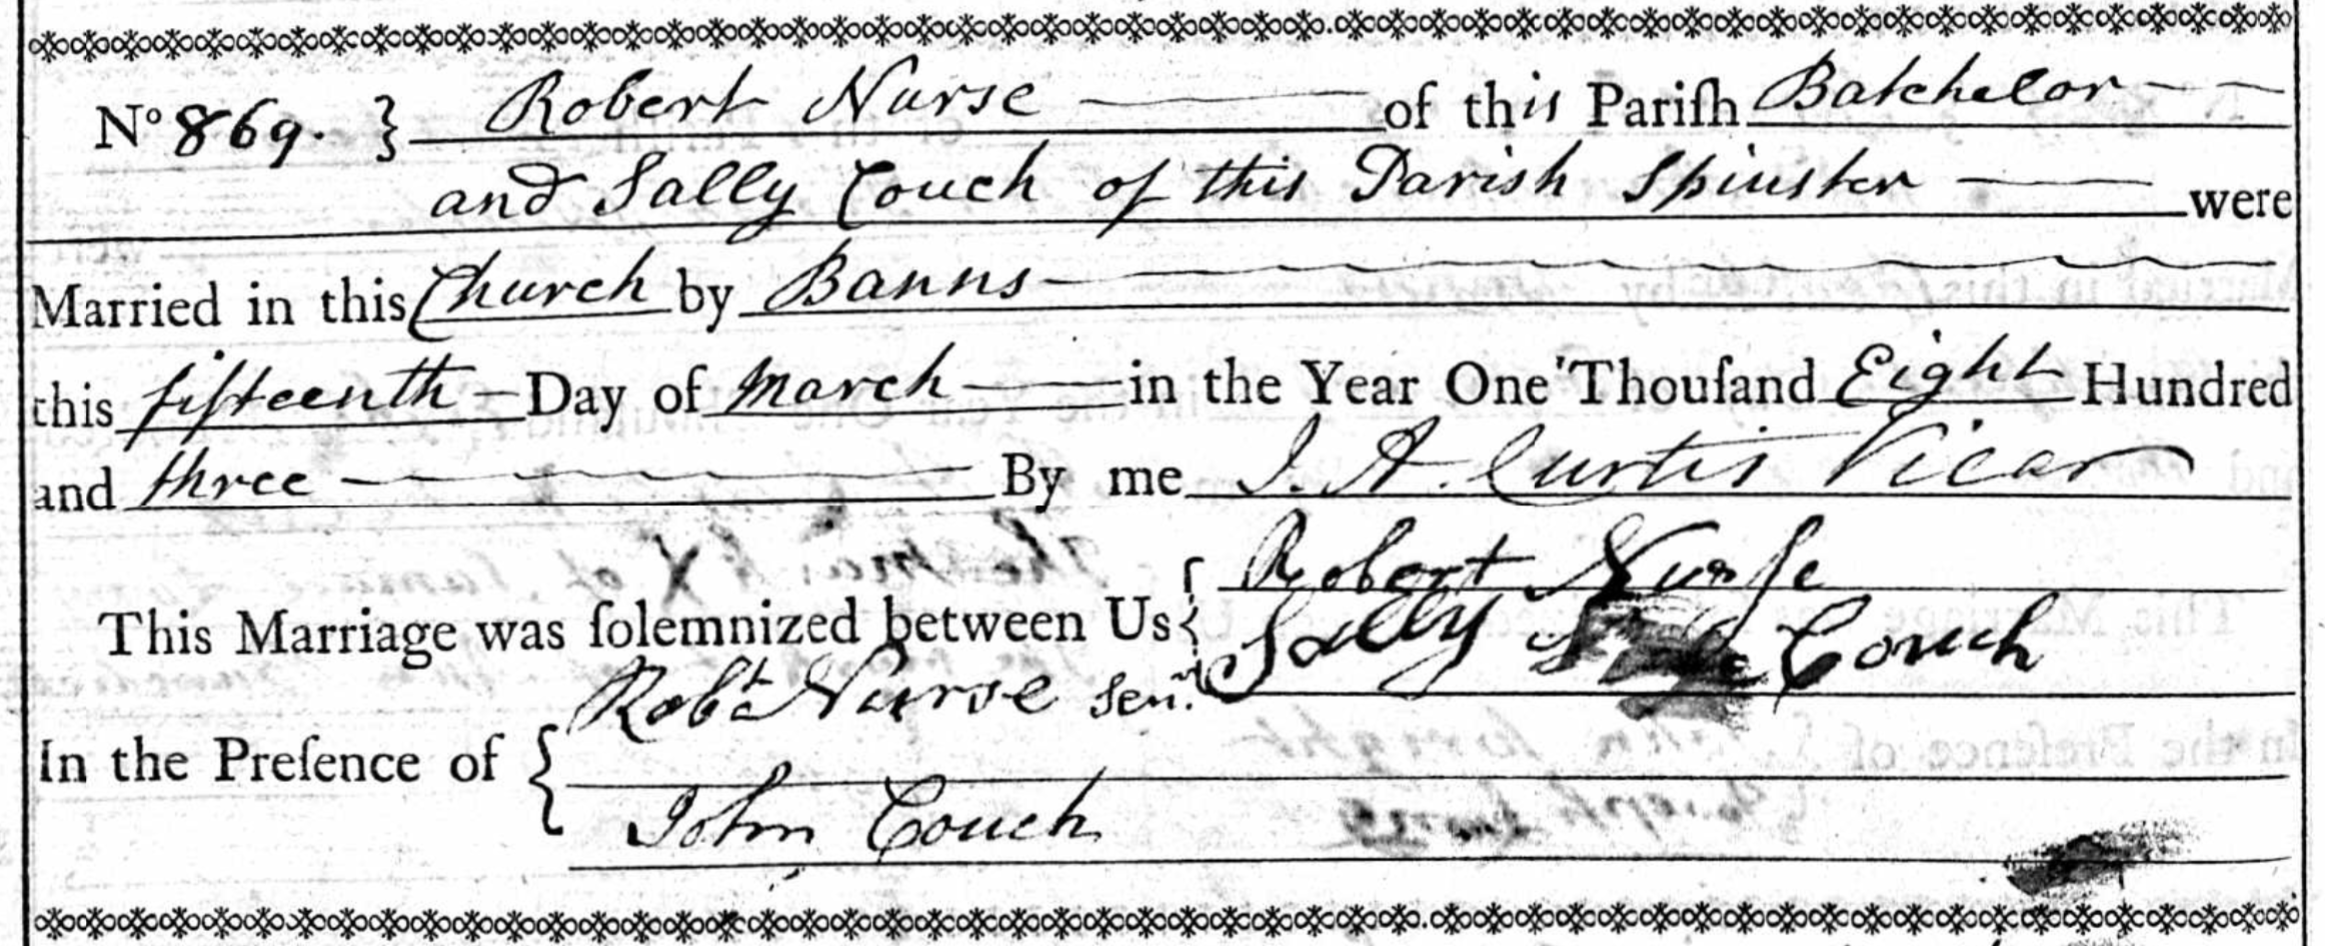 Figure 1: The Marriage Register entry for Robert and Sally Nurse